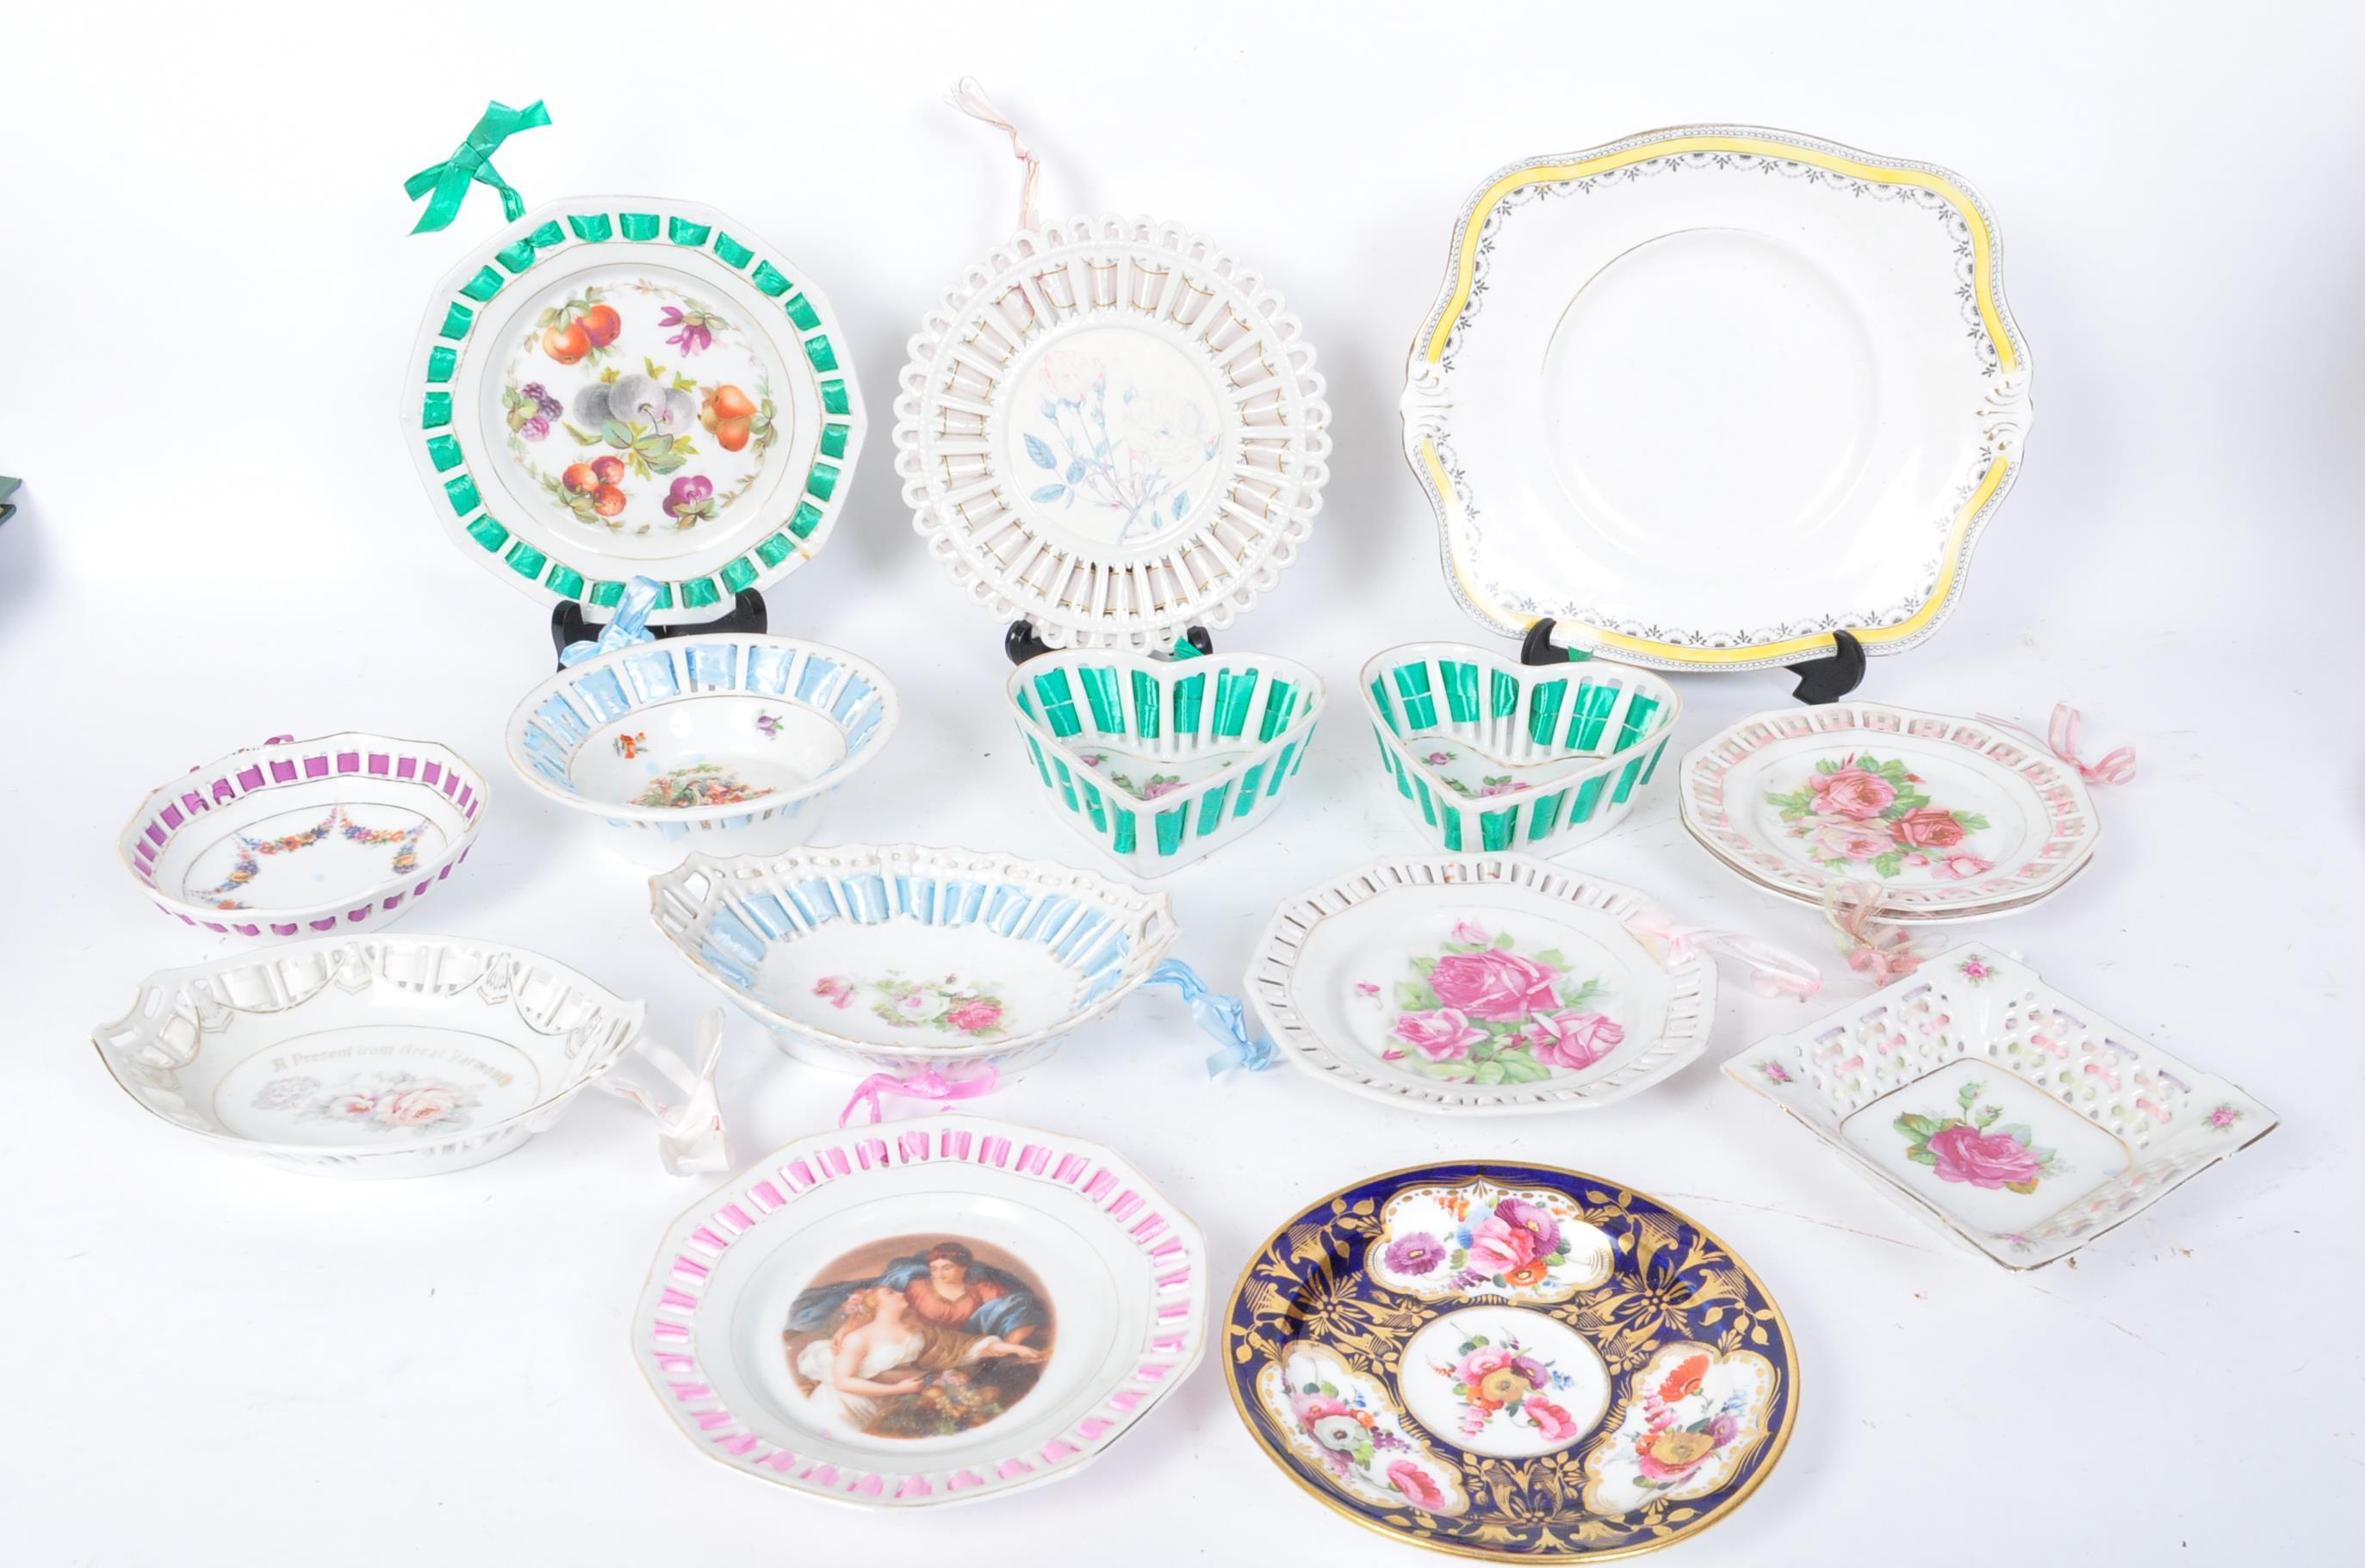 ASSORTMENT OF 19TH CENTURY RIBBON PLATES & DISHES